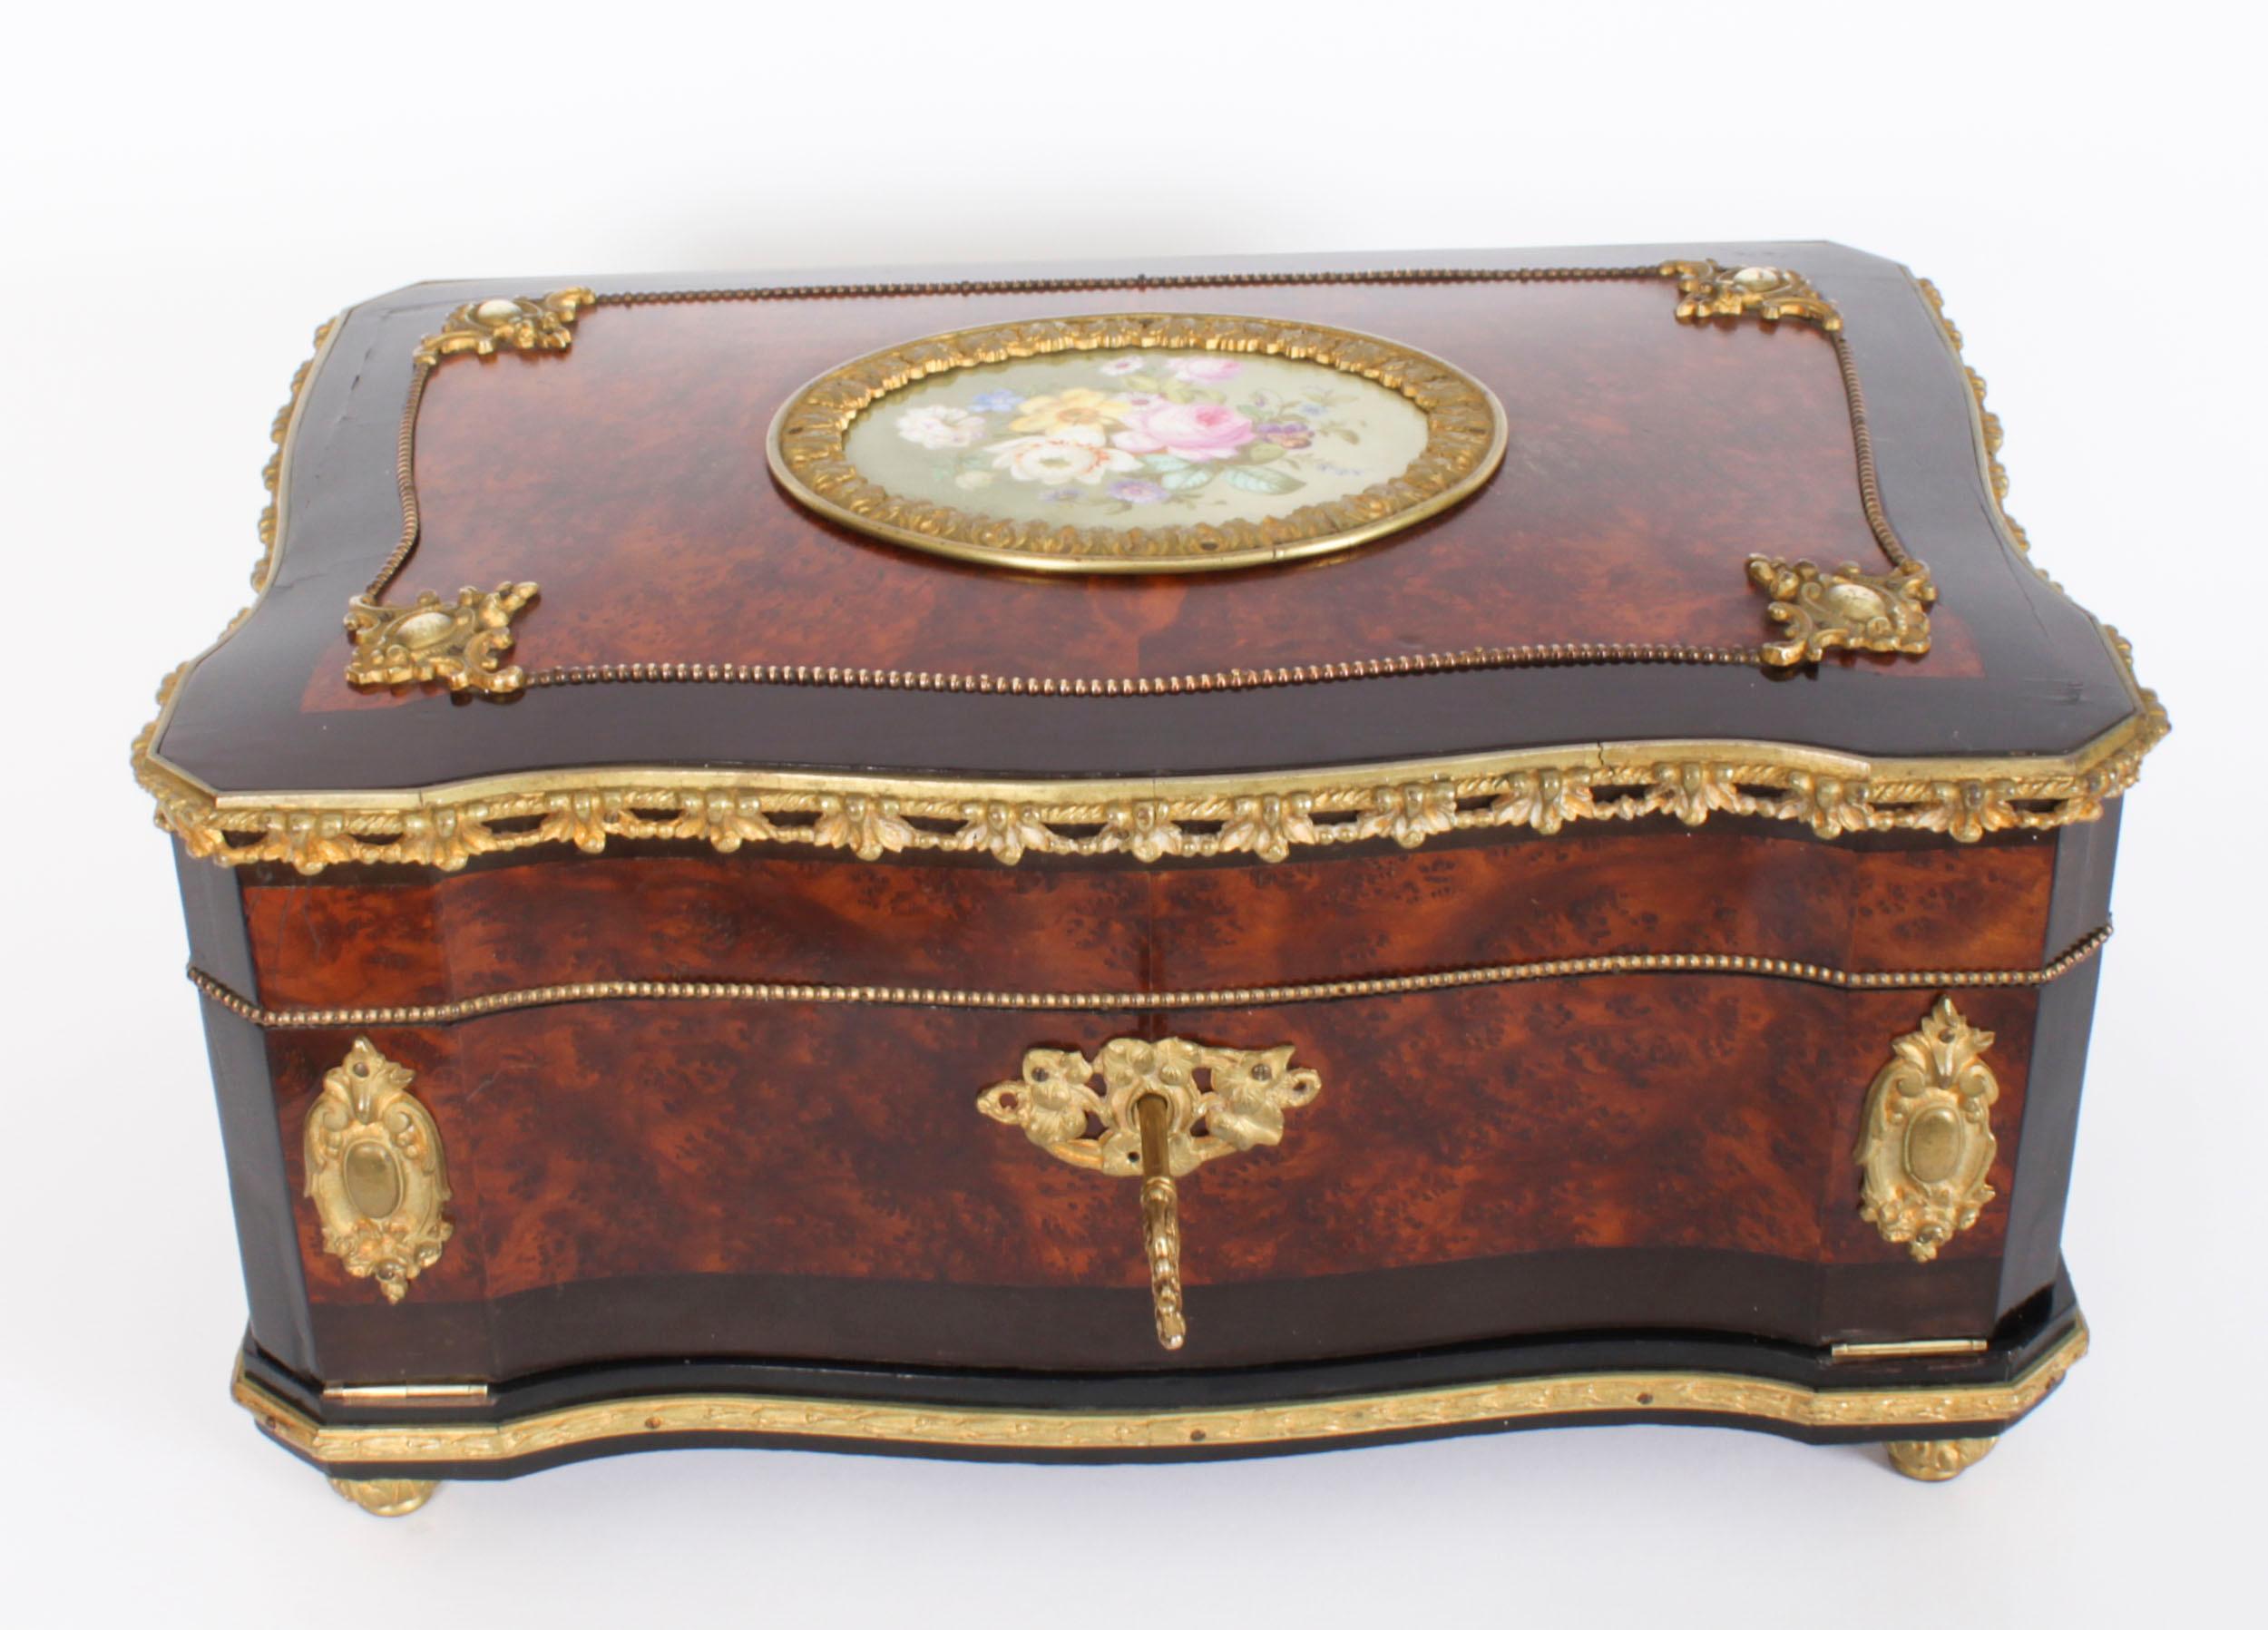 Antique Huge French Amboyna Porcelain Cameo Writing Casket 19th C In Good Condition For Sale In London, GB